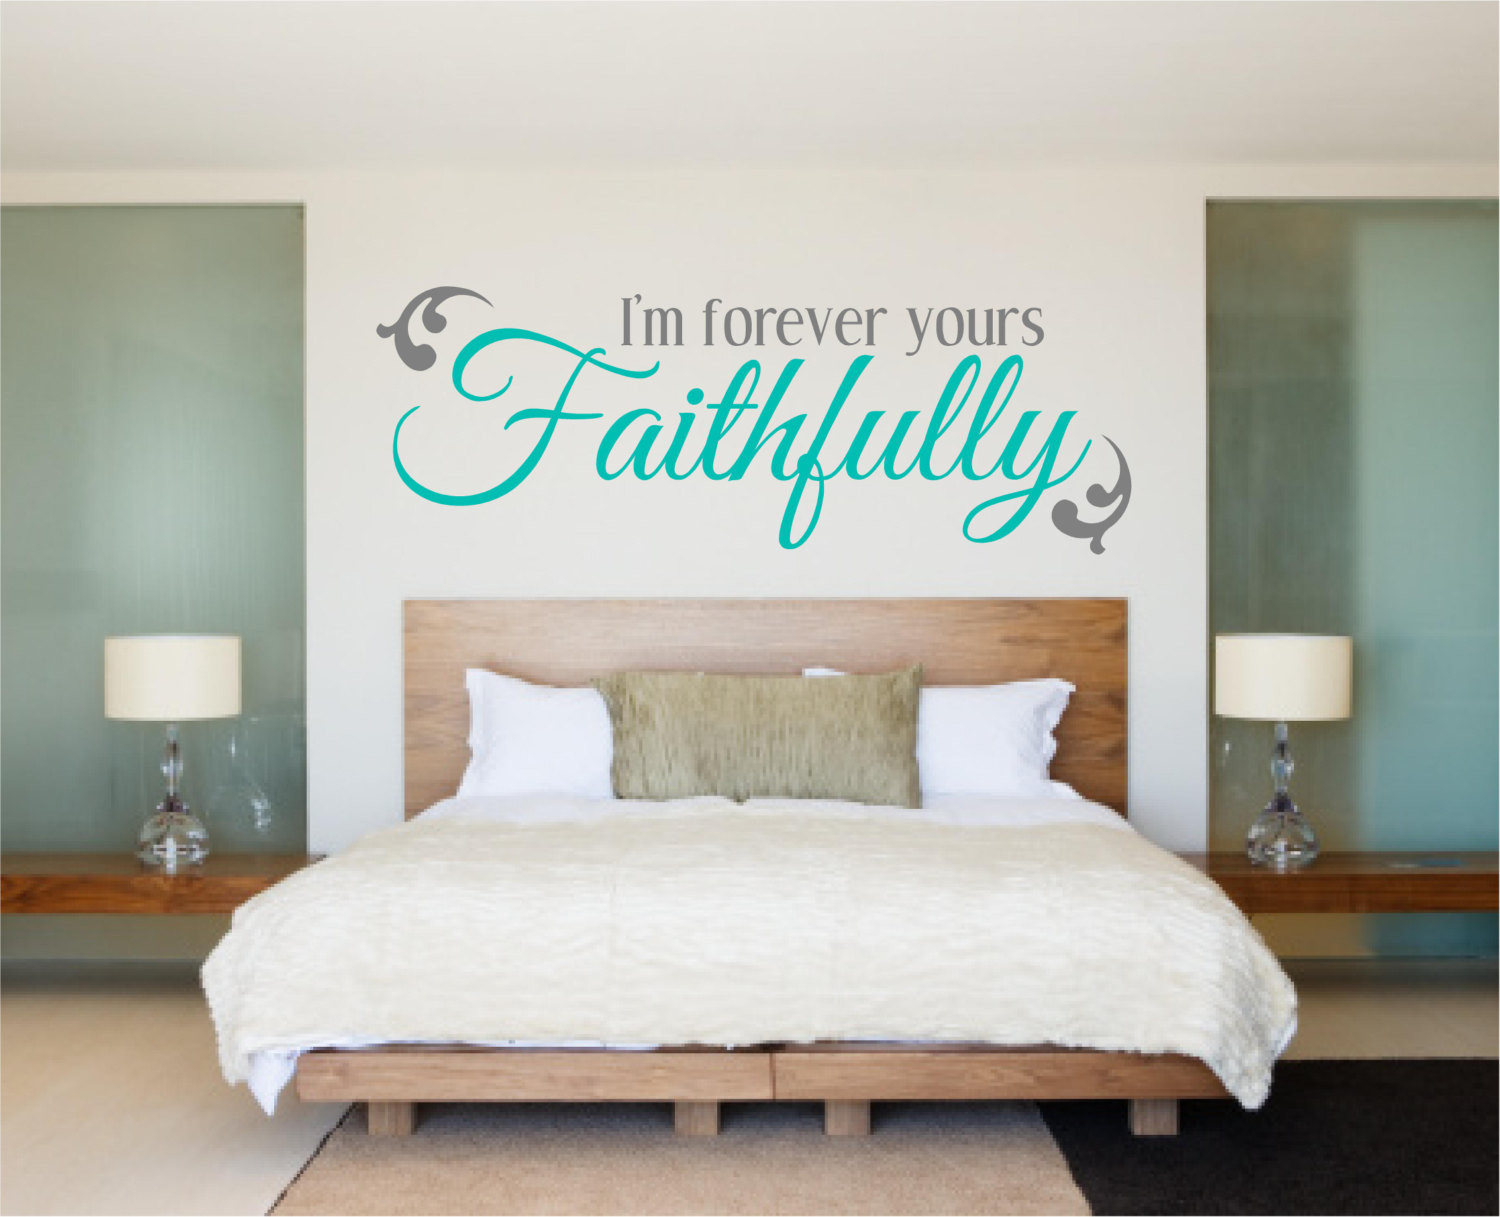 Bedroom Wall Decal
 Bedroom Decal Bedroom Wall Decal Love Decal I m Forever